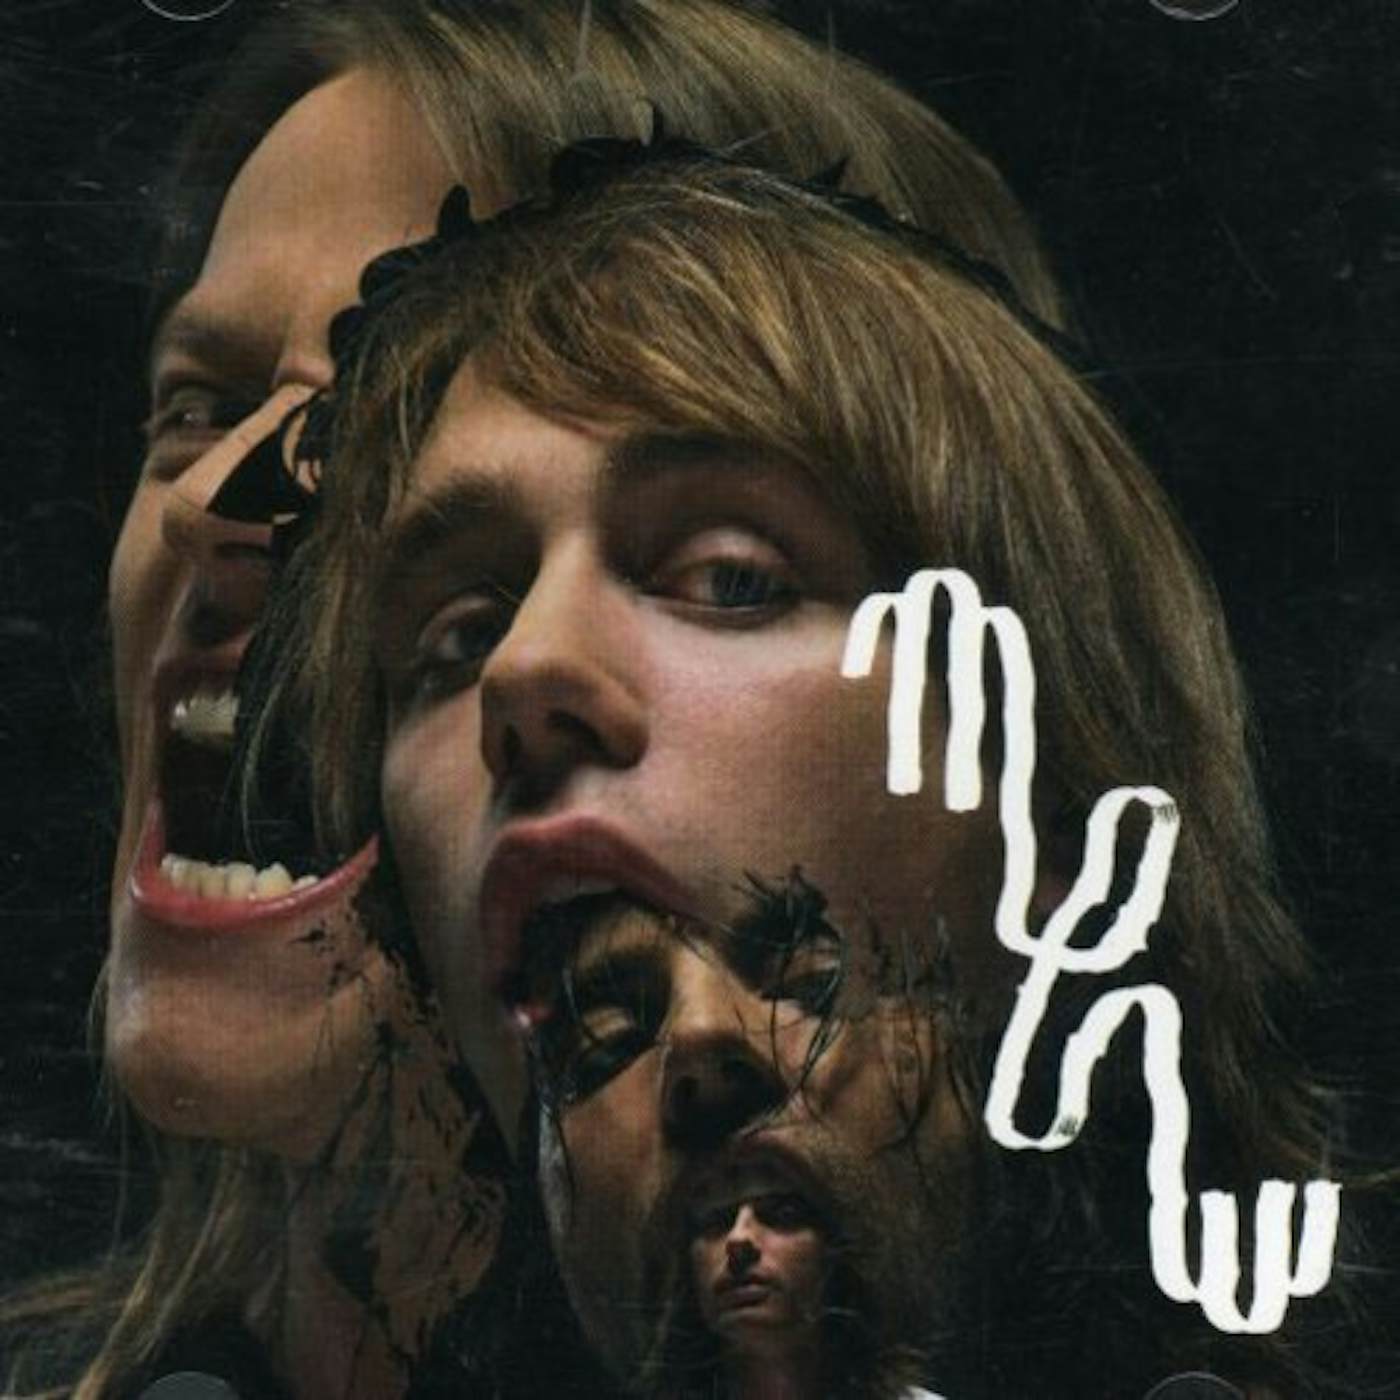 Mew AND THE GLASS HANDED KITES CD